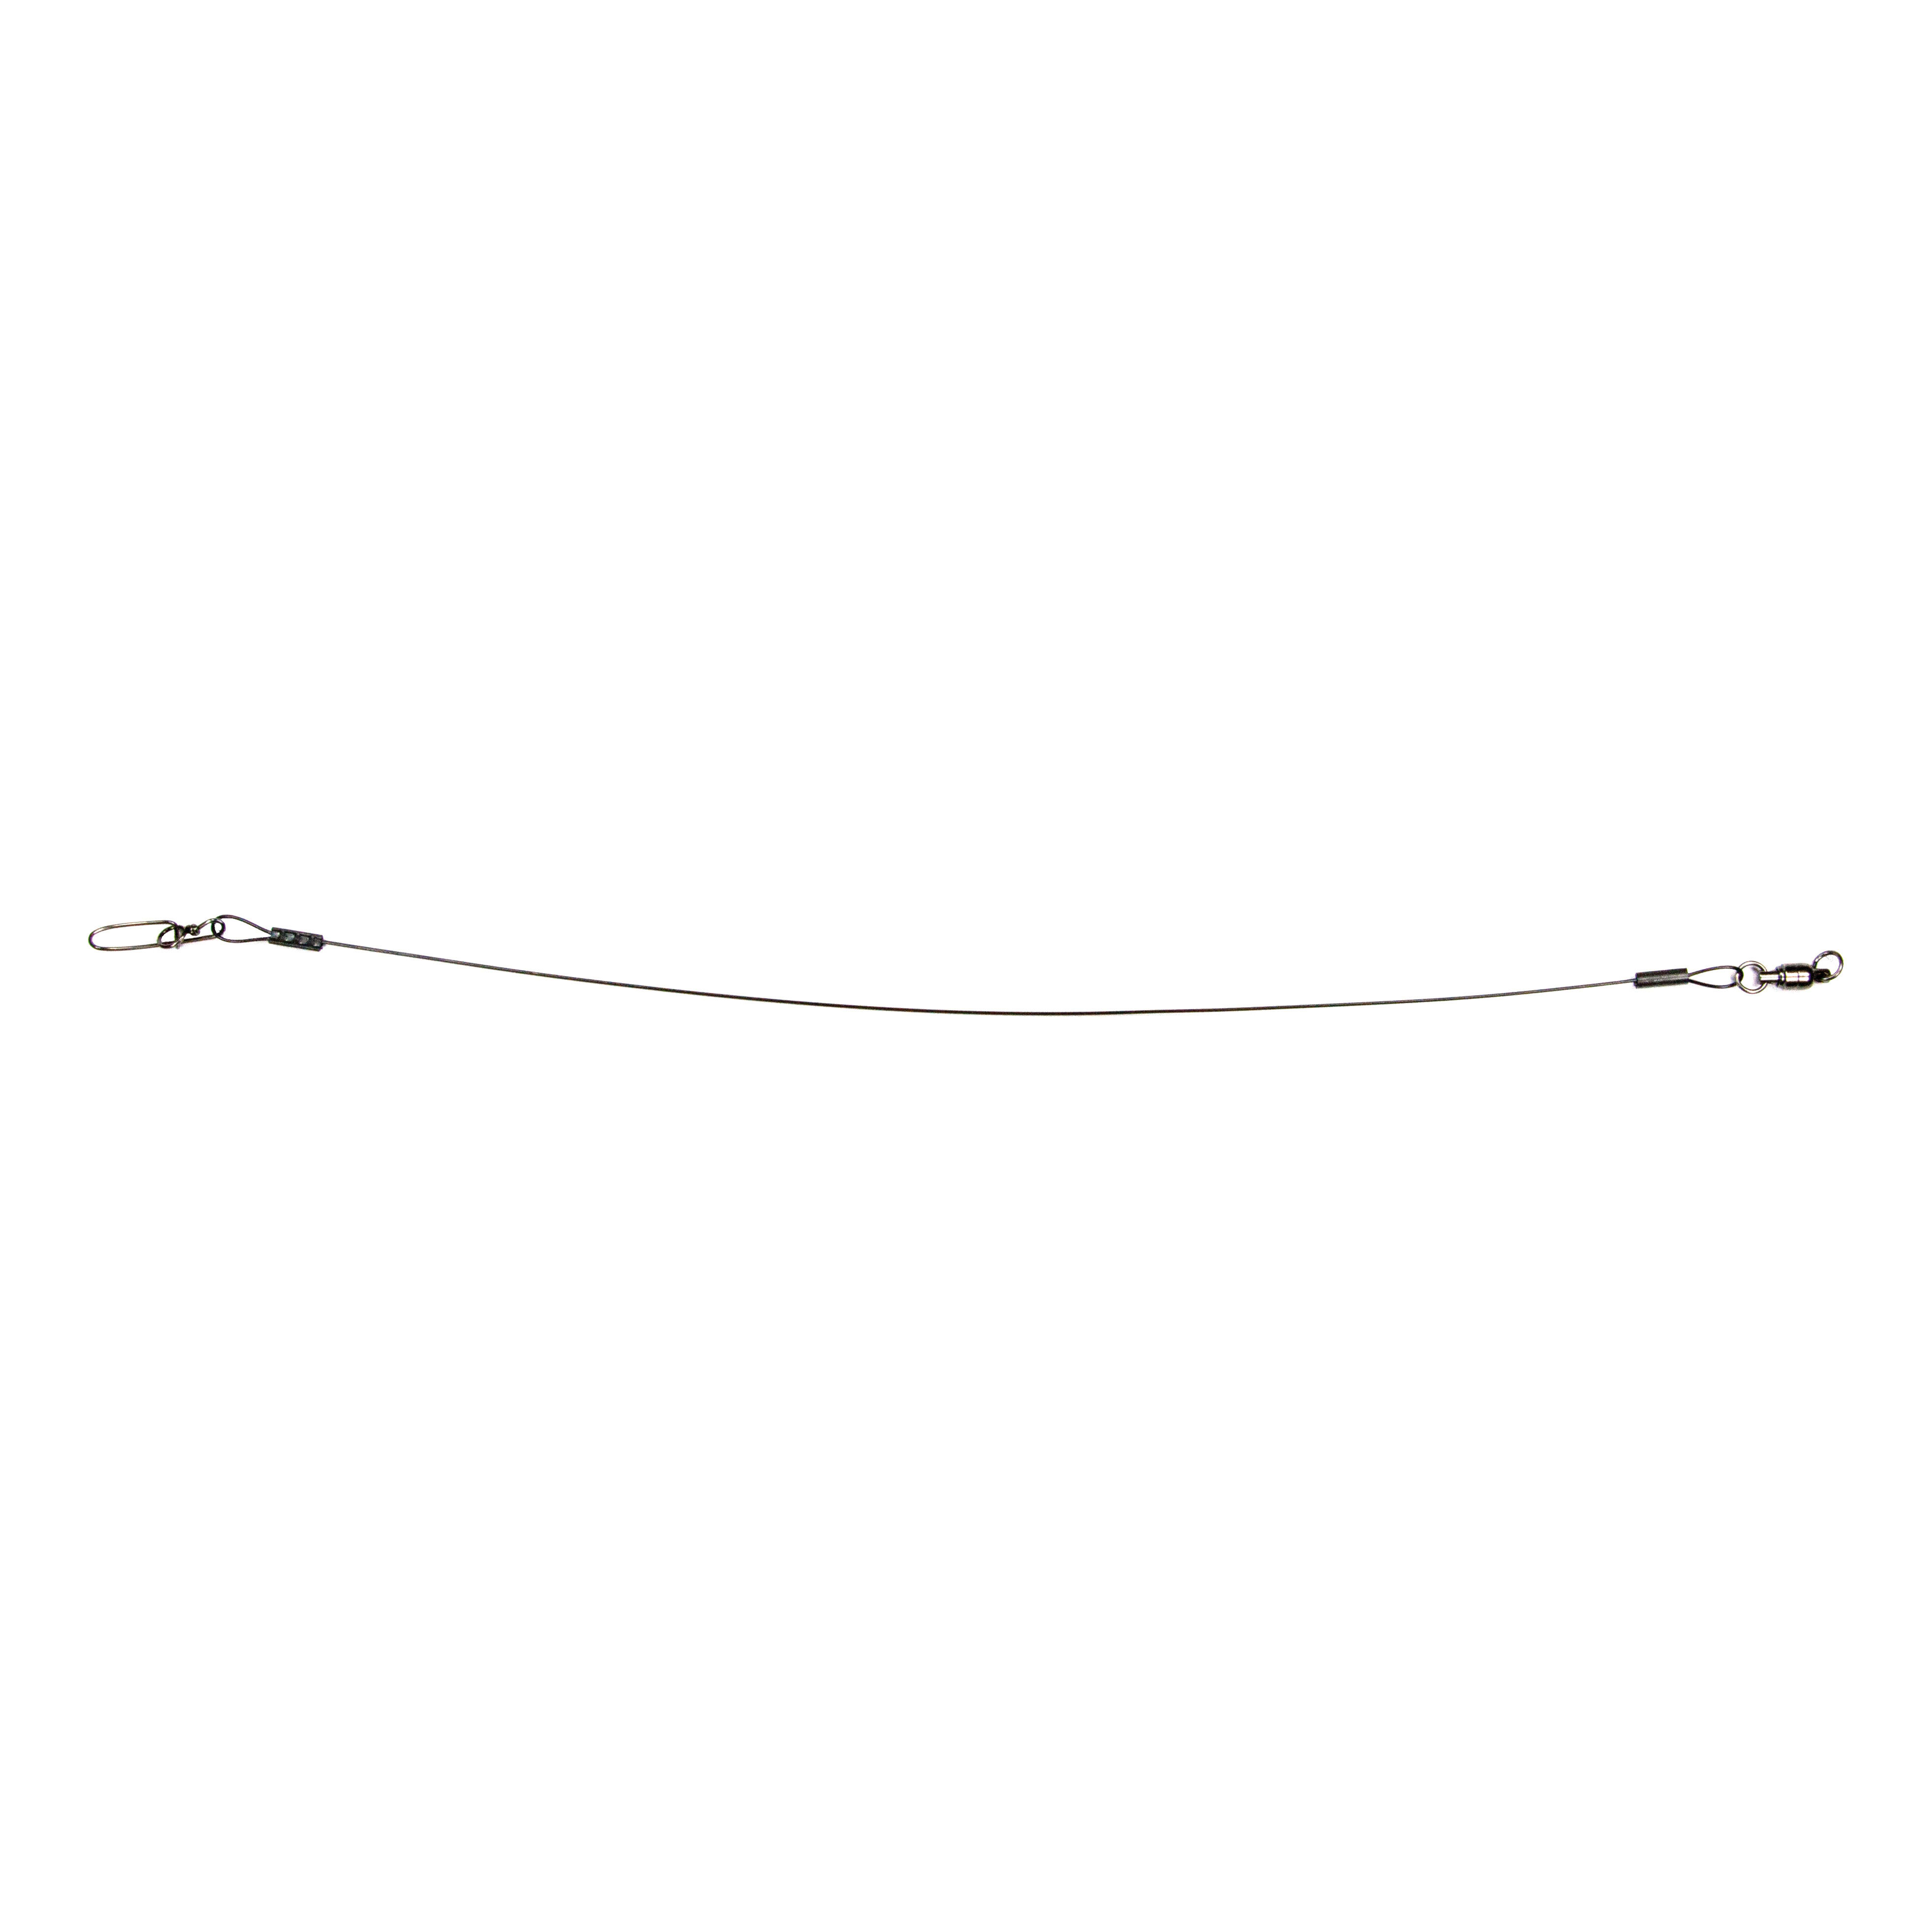 1X7 BlackStainless Steel Wire Leader With Stay-Lok™ SNnap